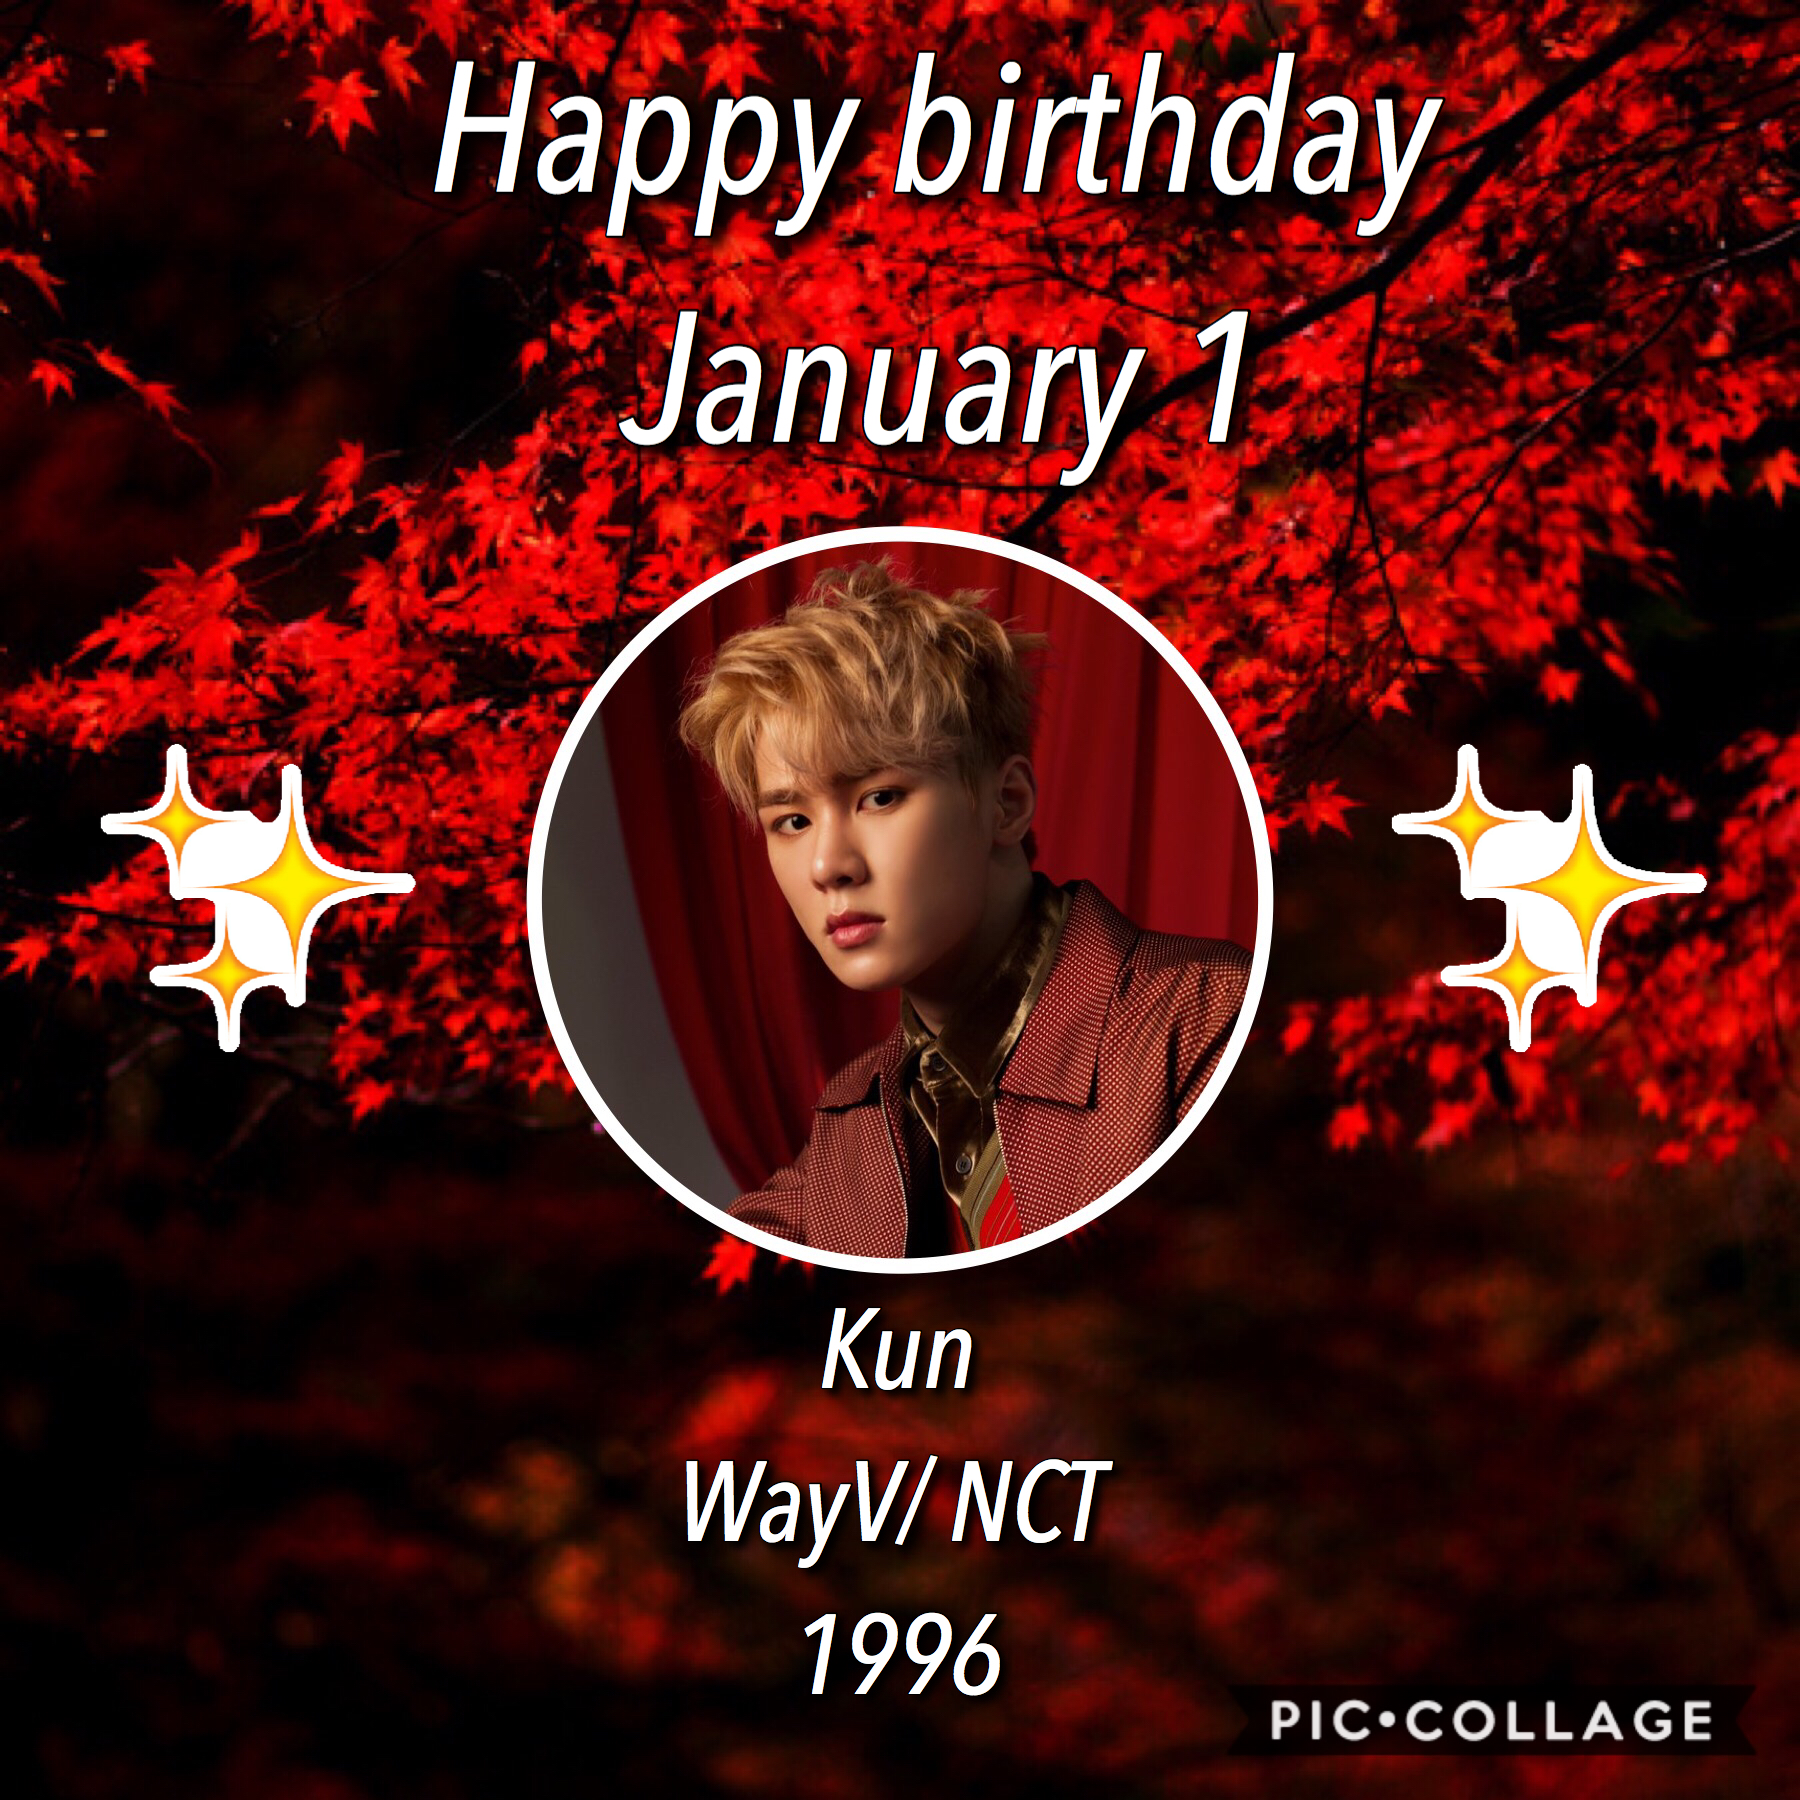 •🎈❄️•
Happy birthday Kun!! Happy New Years to you all! I wish the best for everyone in 2020 as well as this account☺️💞
⛄️❄️~Whoop~❄️⛄️